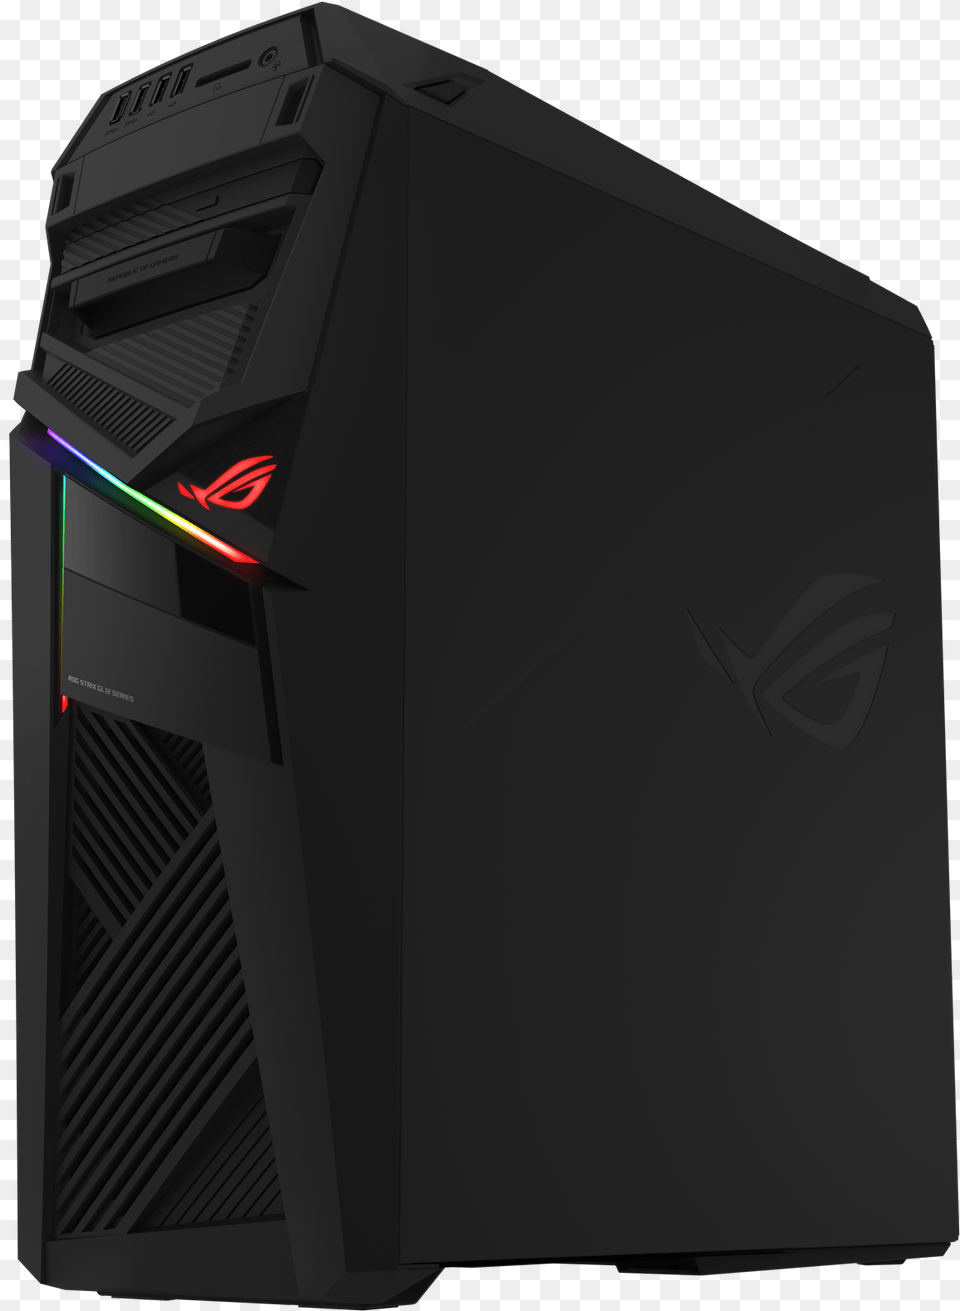 Asus Is Also Launching A New Rog Branded Gaming Desktop Rog Strix Gl12 Price, Computer, Computer Hardware, Electronics, Hardware Png Image